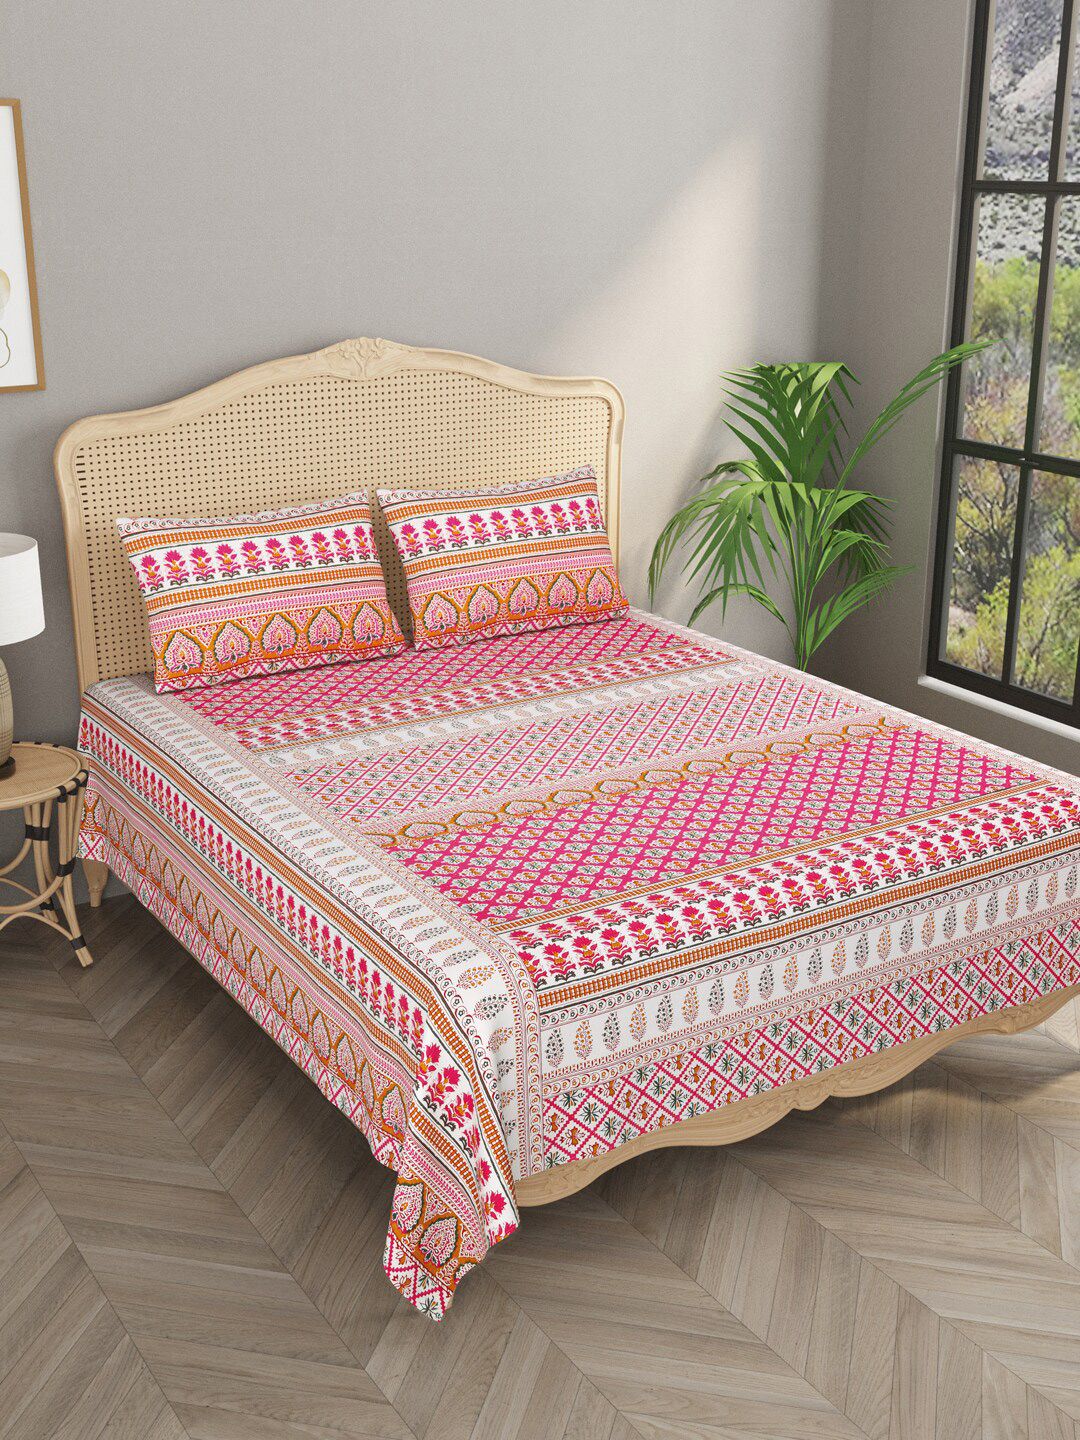 Gulaab Jaipur Red & White Ethnic Motifs 400 TC King Bedsheet with 2 Pillow Covers Price in India